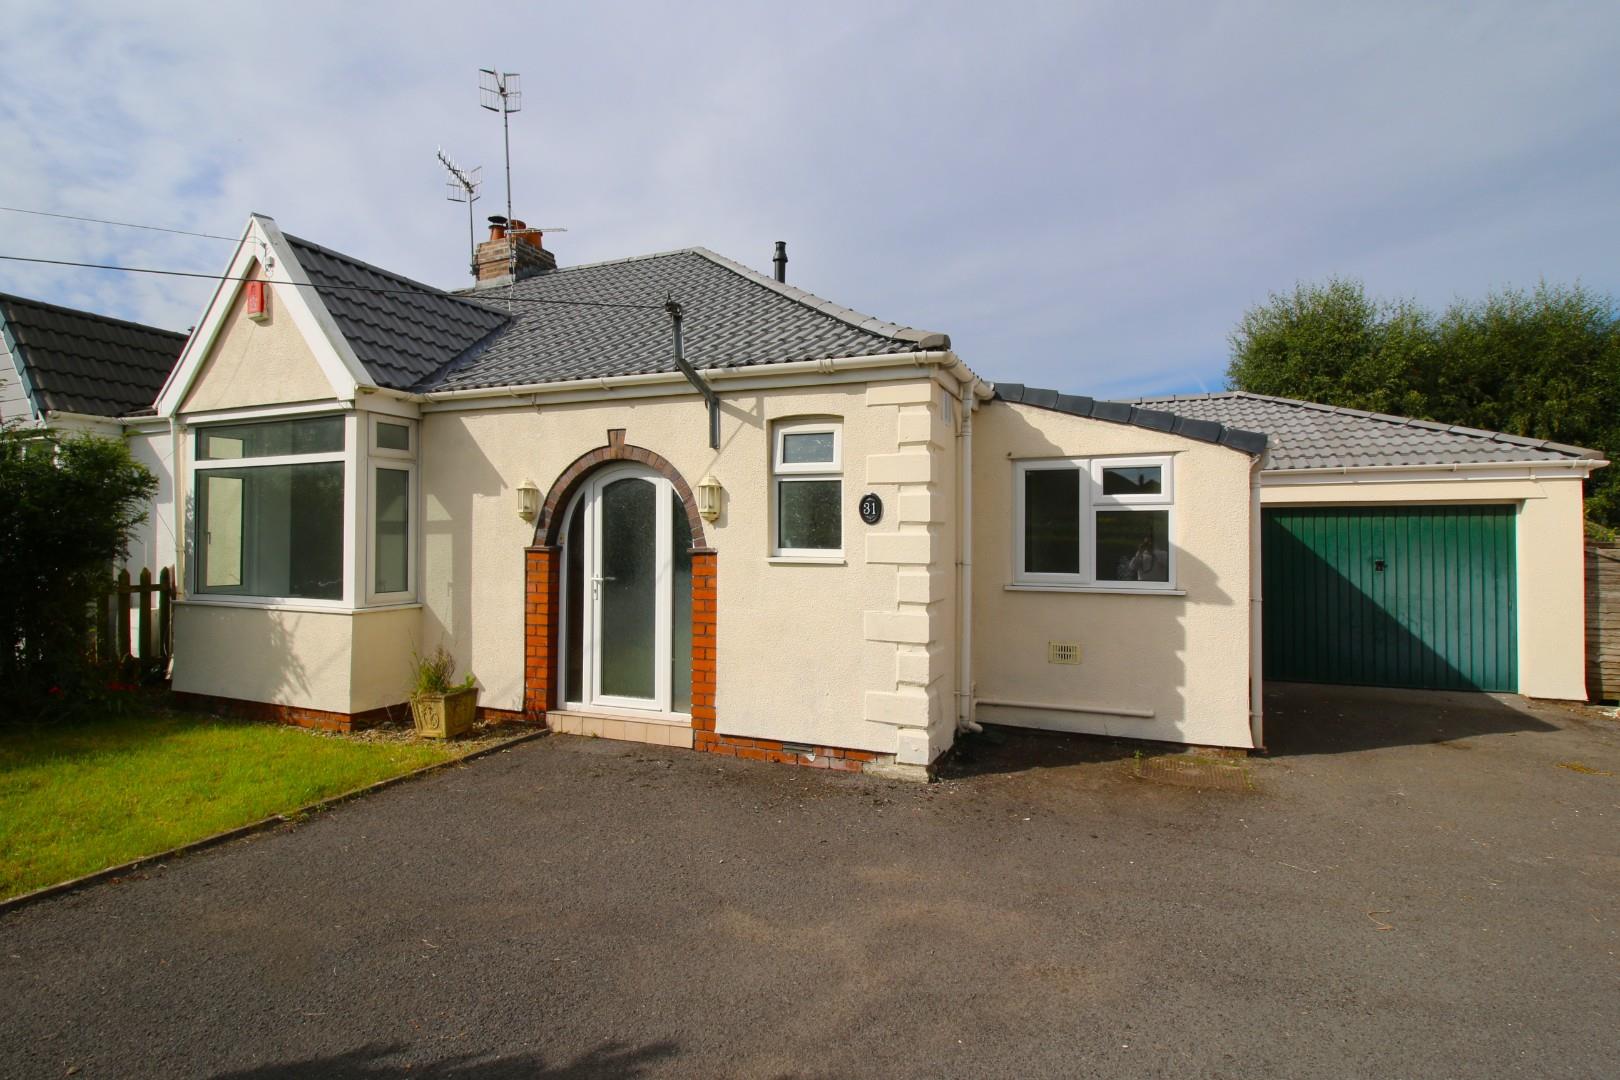 Fully refurbished bungalow in the village of Cleeve